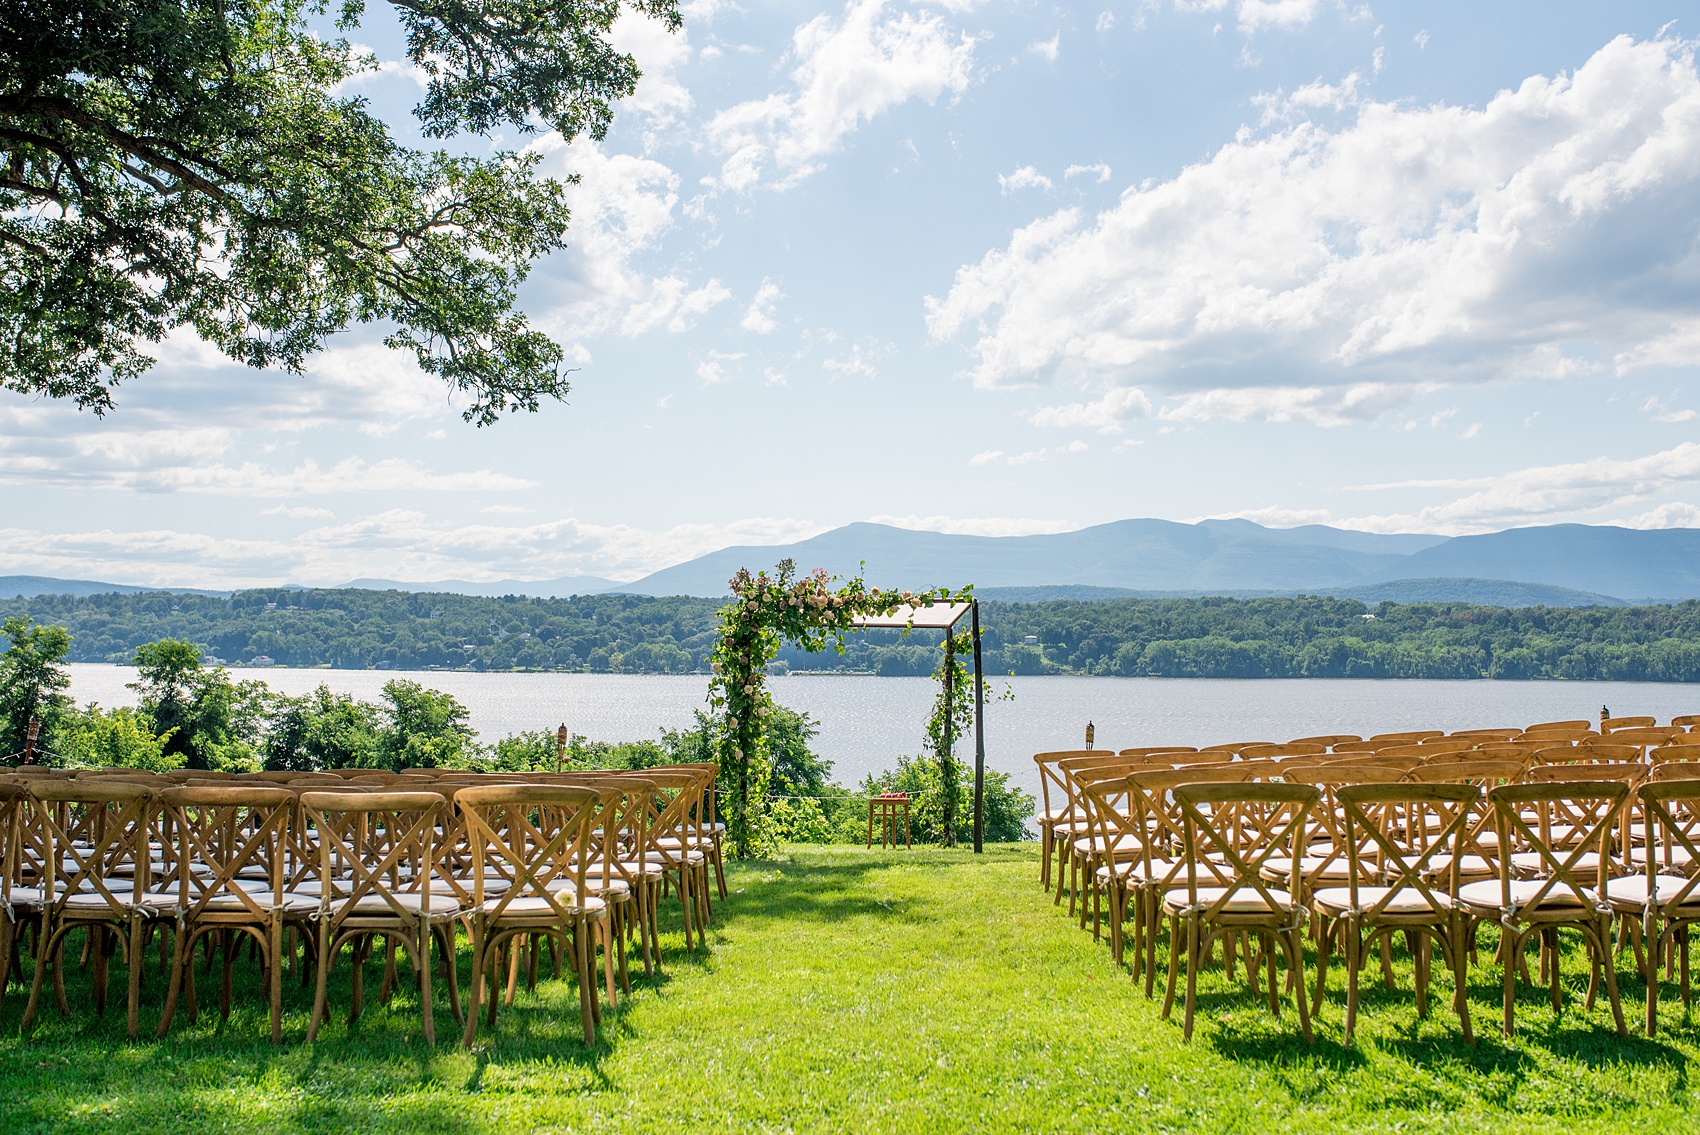 Mikkel Paige Photography photos from a Southwood Estate Wedding in Germantown, New York in the Hudson Valley. Picture of the ceremony setup overlooking the Hudson Valley mountains and river.